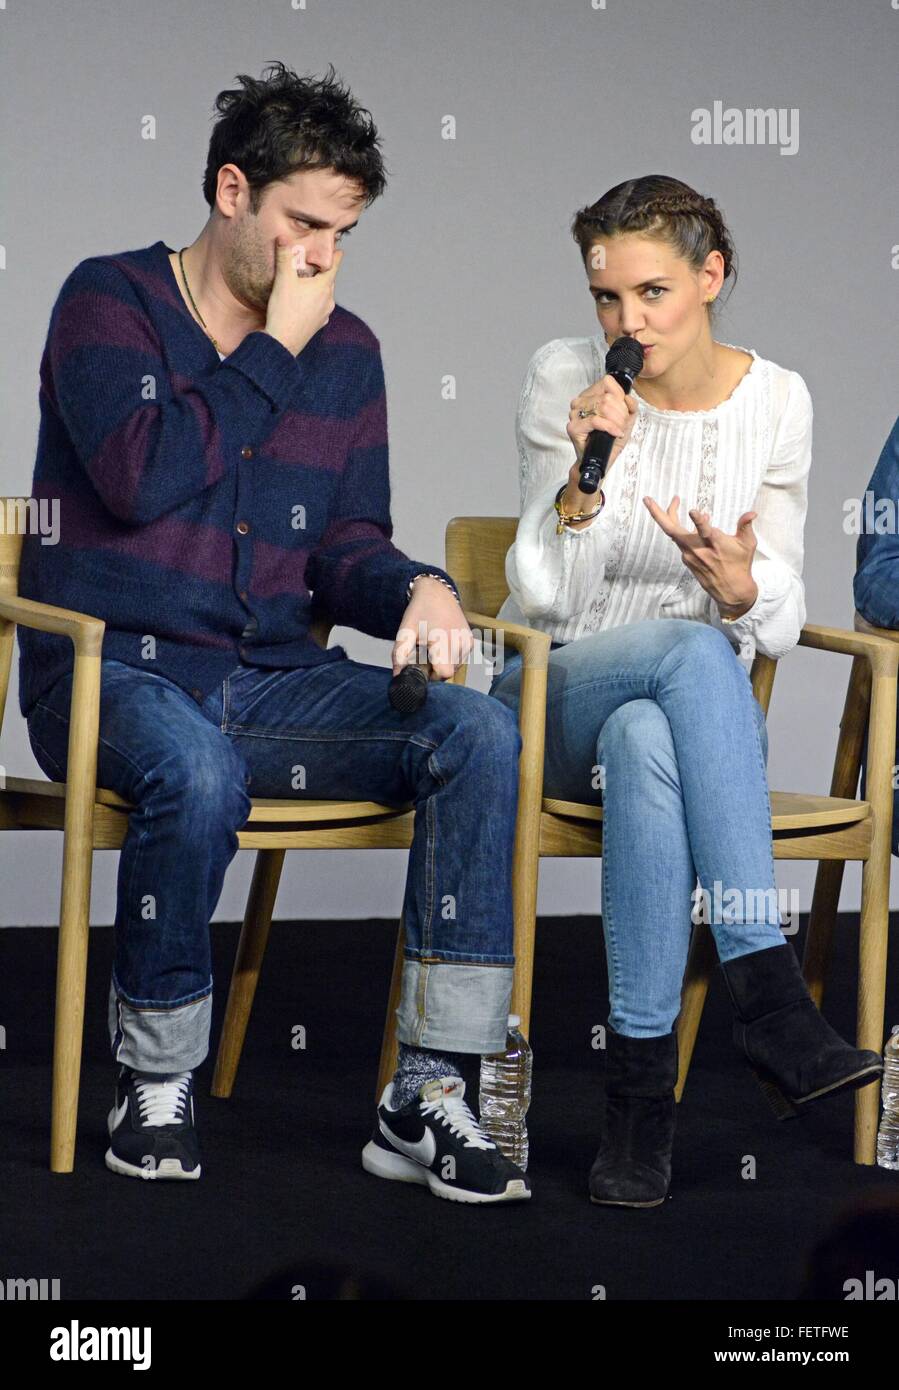 New York, NY, USA. 8th Feb, 2016. Luke Kirby, Katie Holmes at in-store  appearance for Meet the Filmmaker: TOUCHED WITH FIRE, The Apple Store Soho,  New York, NY February 8, 2016. Credit: